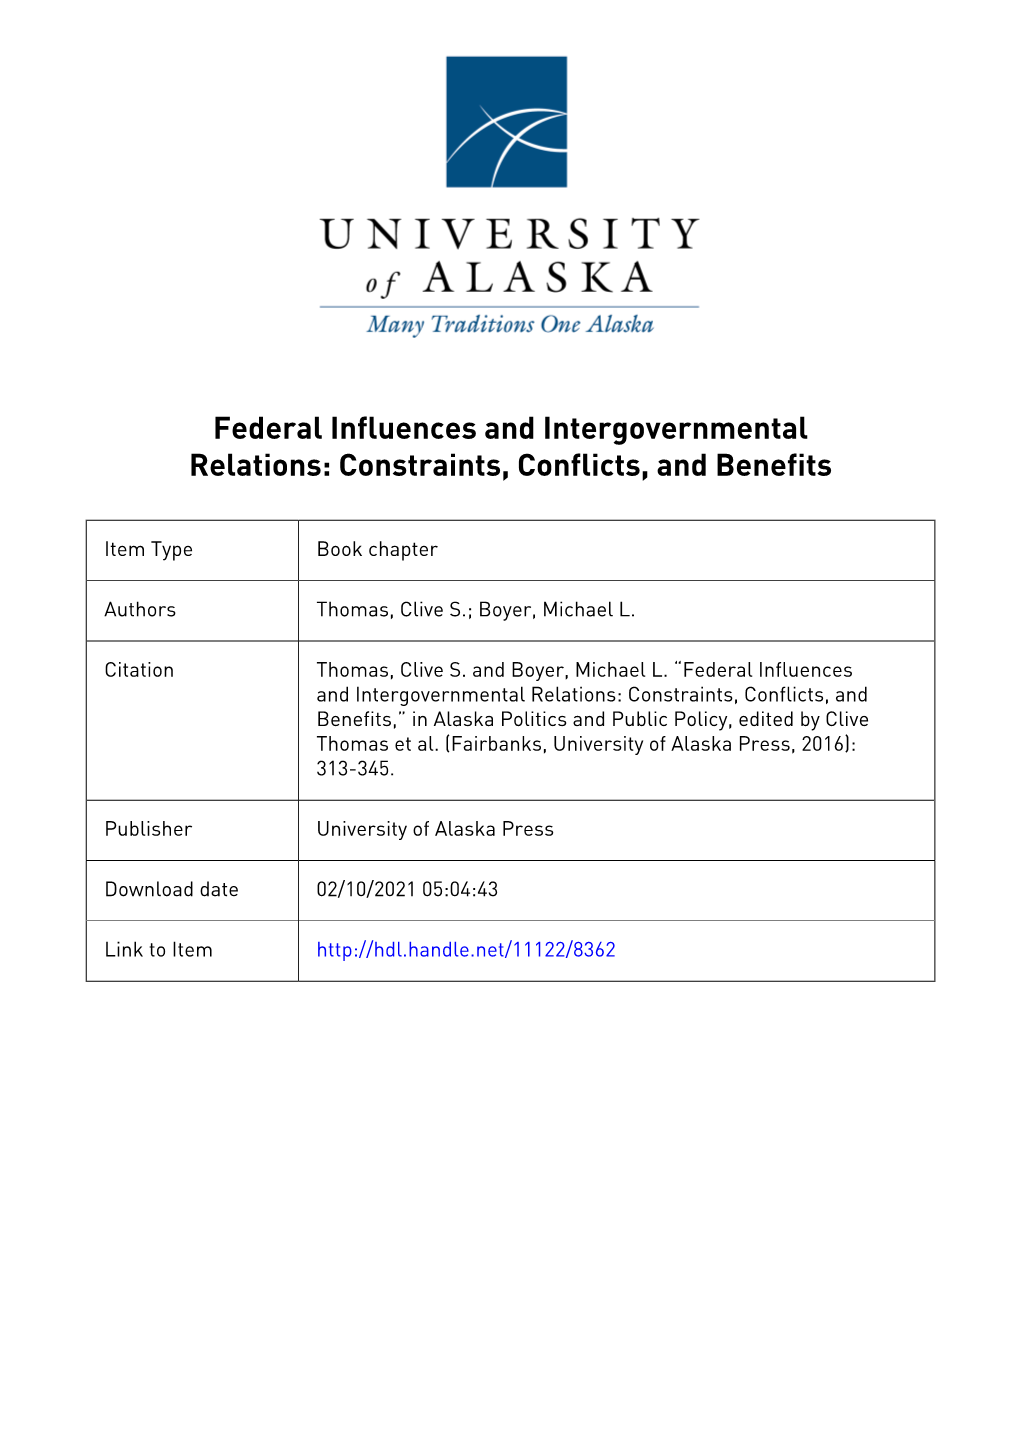 Federal Influences and Intergovernmental Relations: Constraints, Conflicts, and Benefits